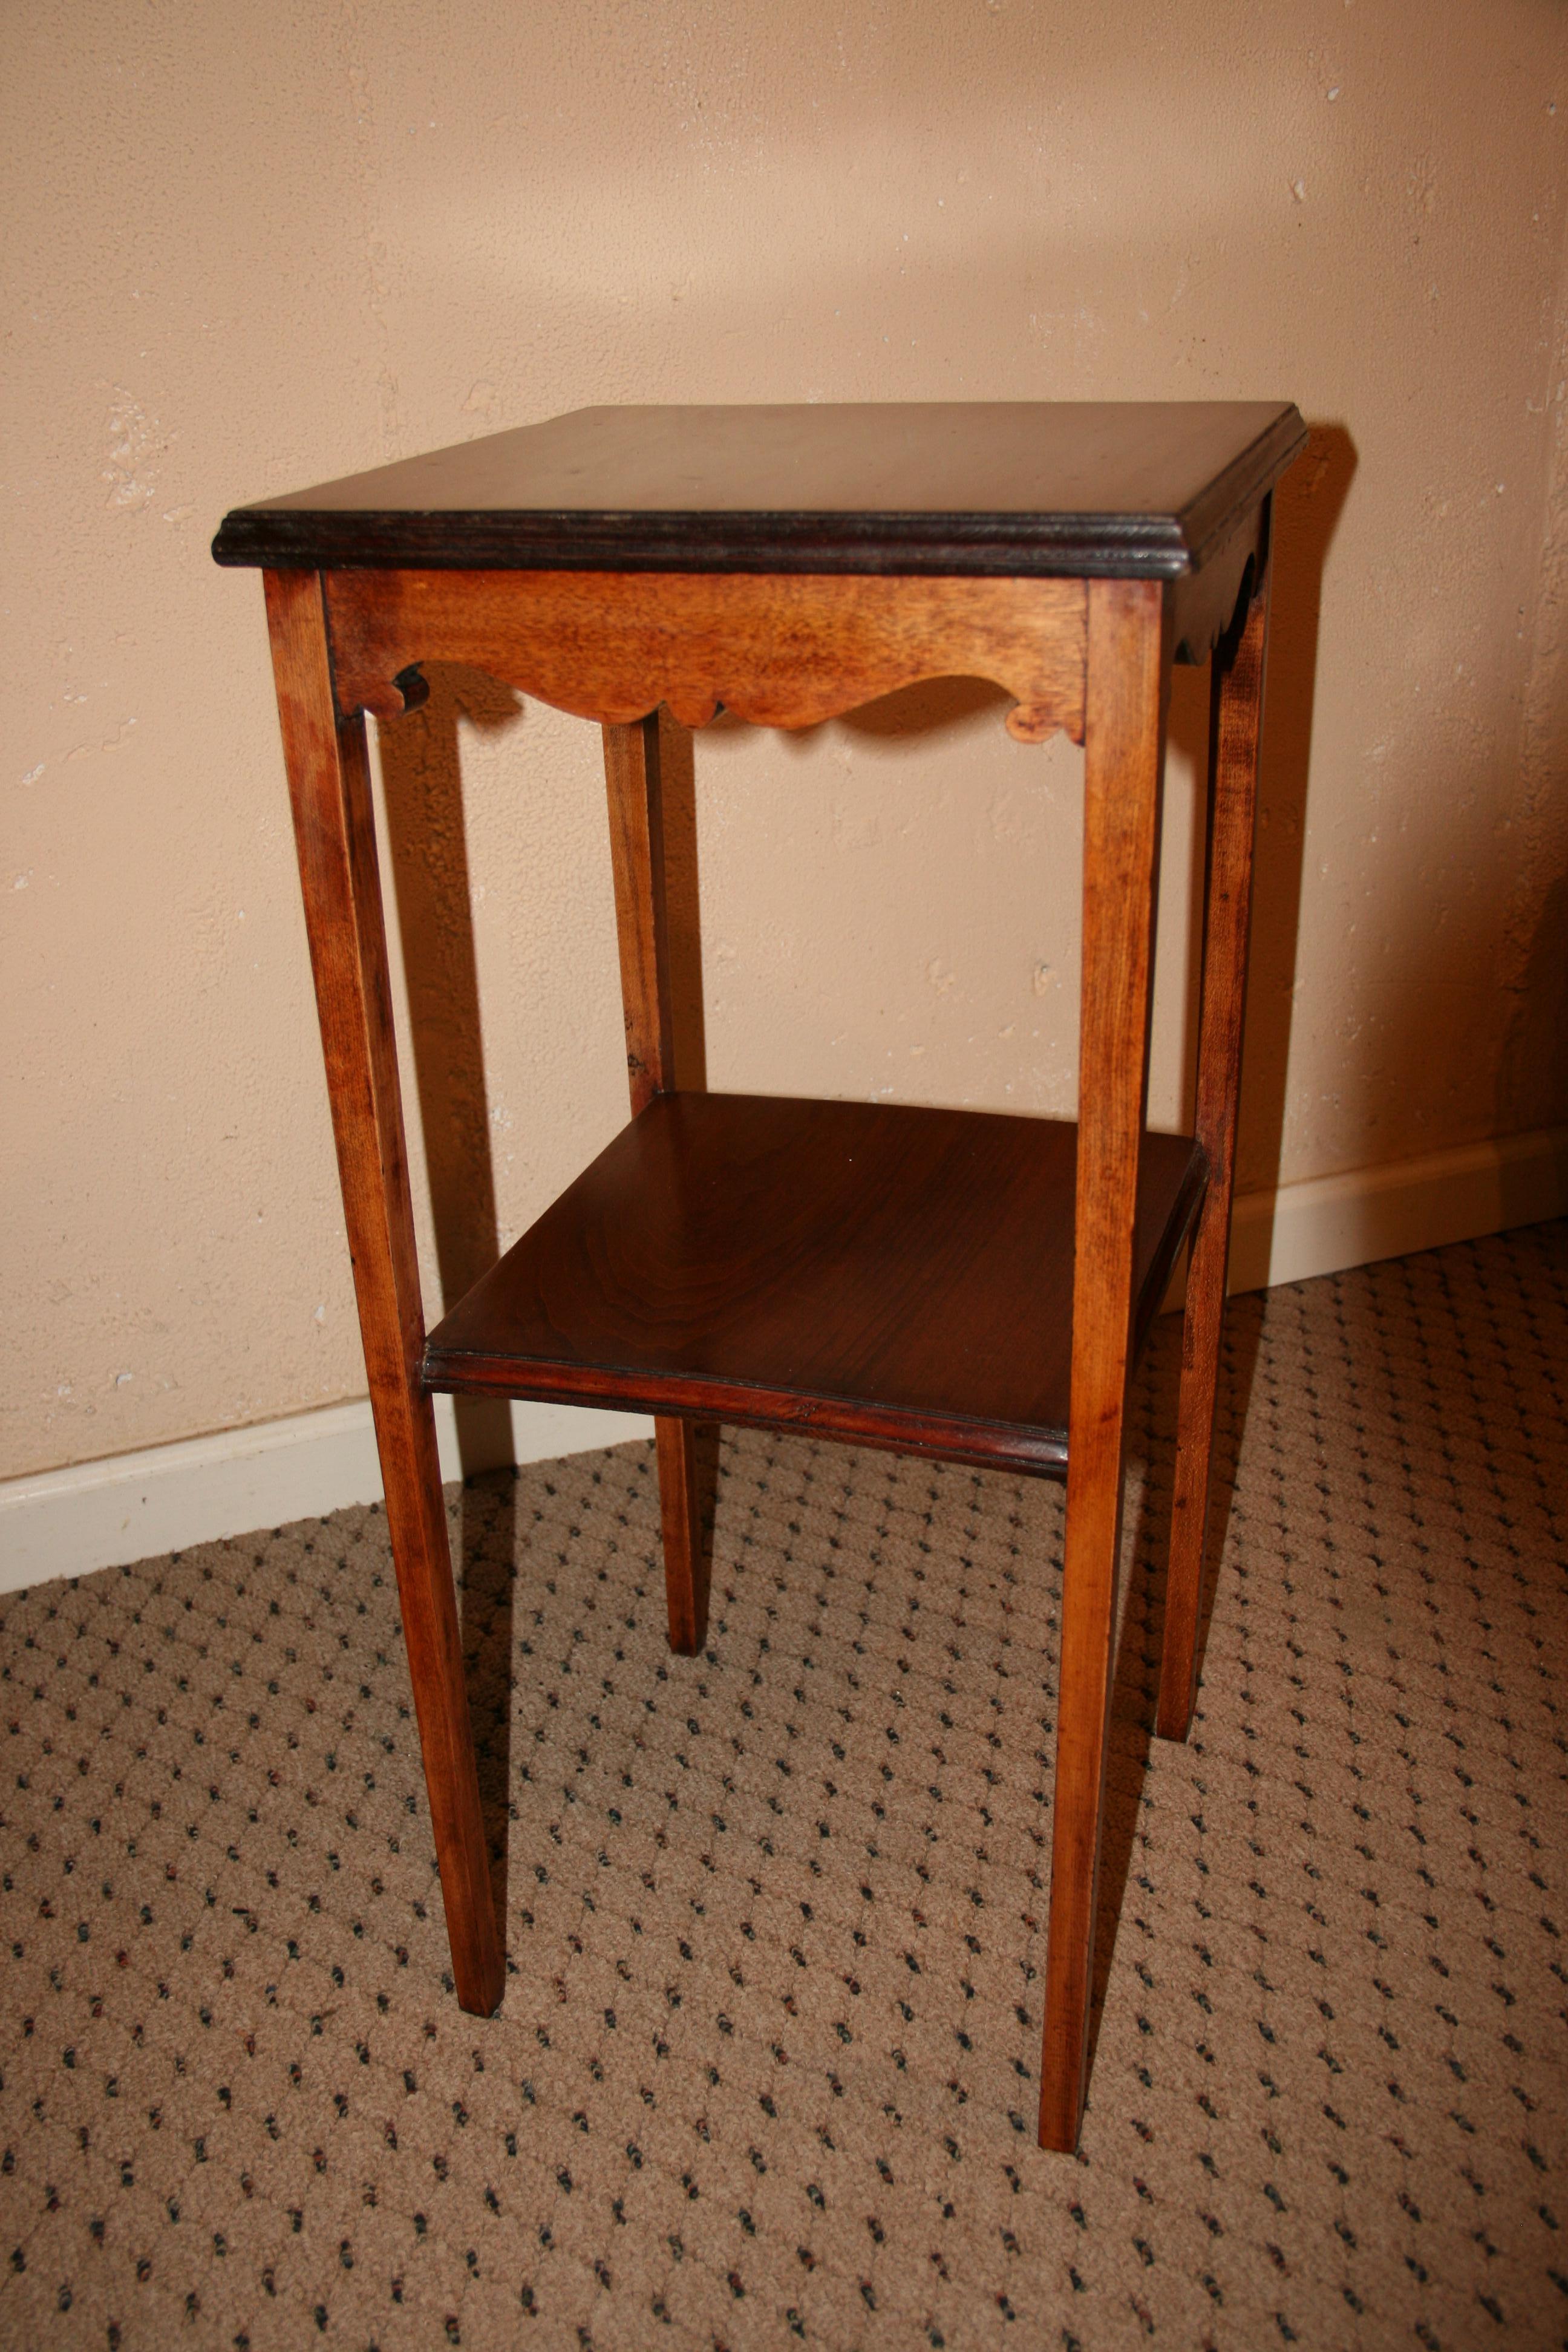 Hand-Crafted English Walnut Two Level Scalloped  Spider Leg Table / Pedestal 1920's For Sale